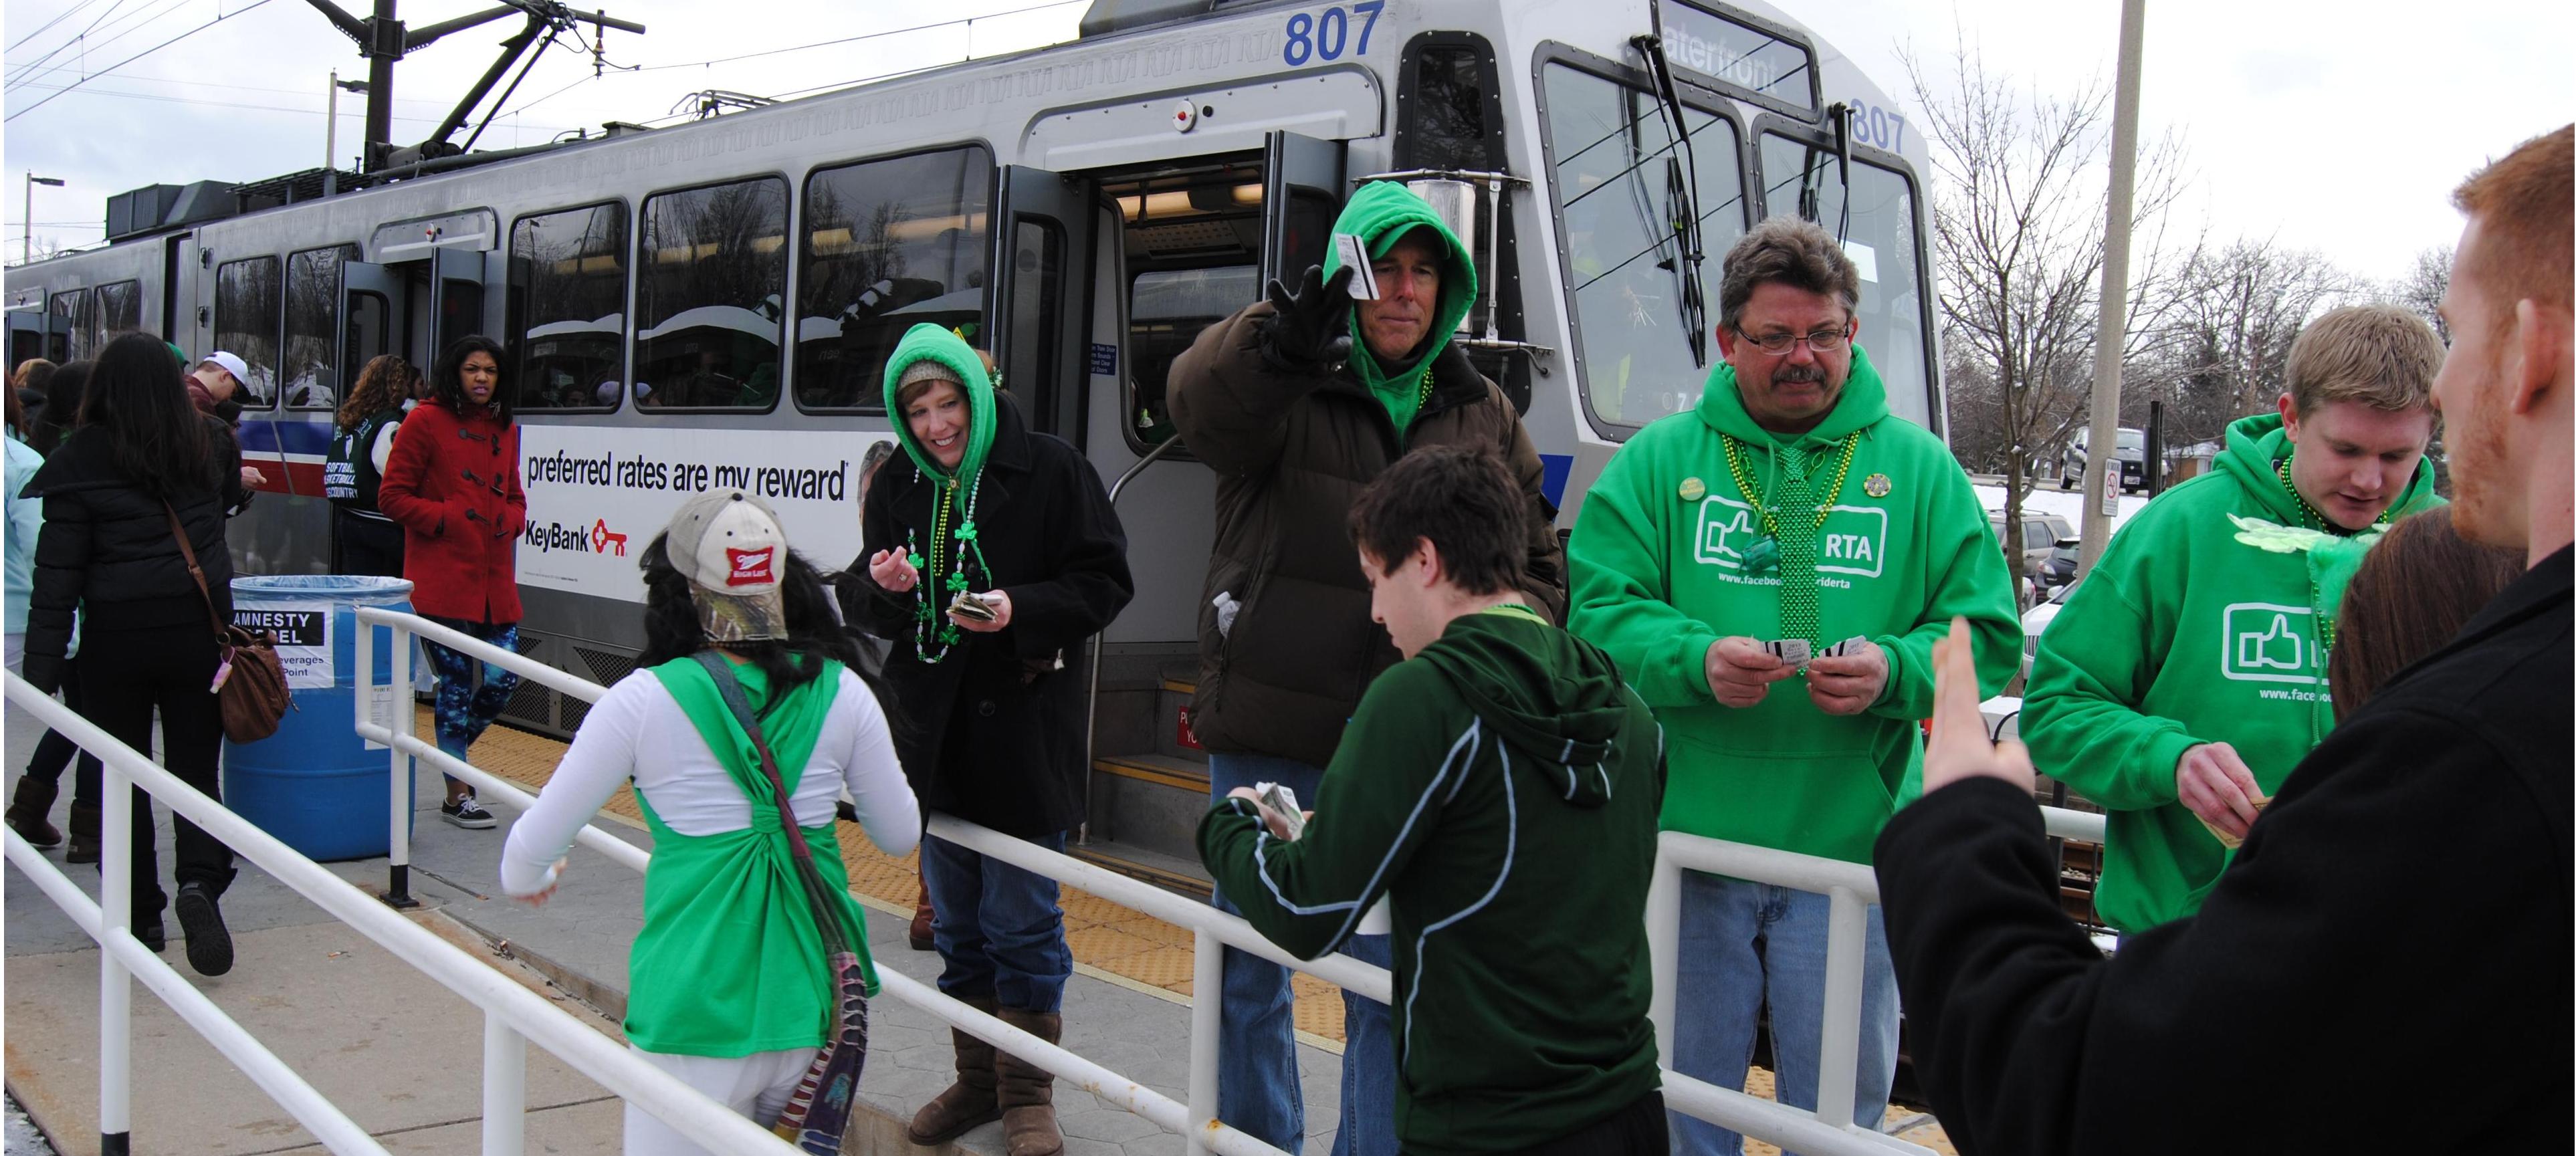  RTA service on St. Patrick's Day: smooth and successful